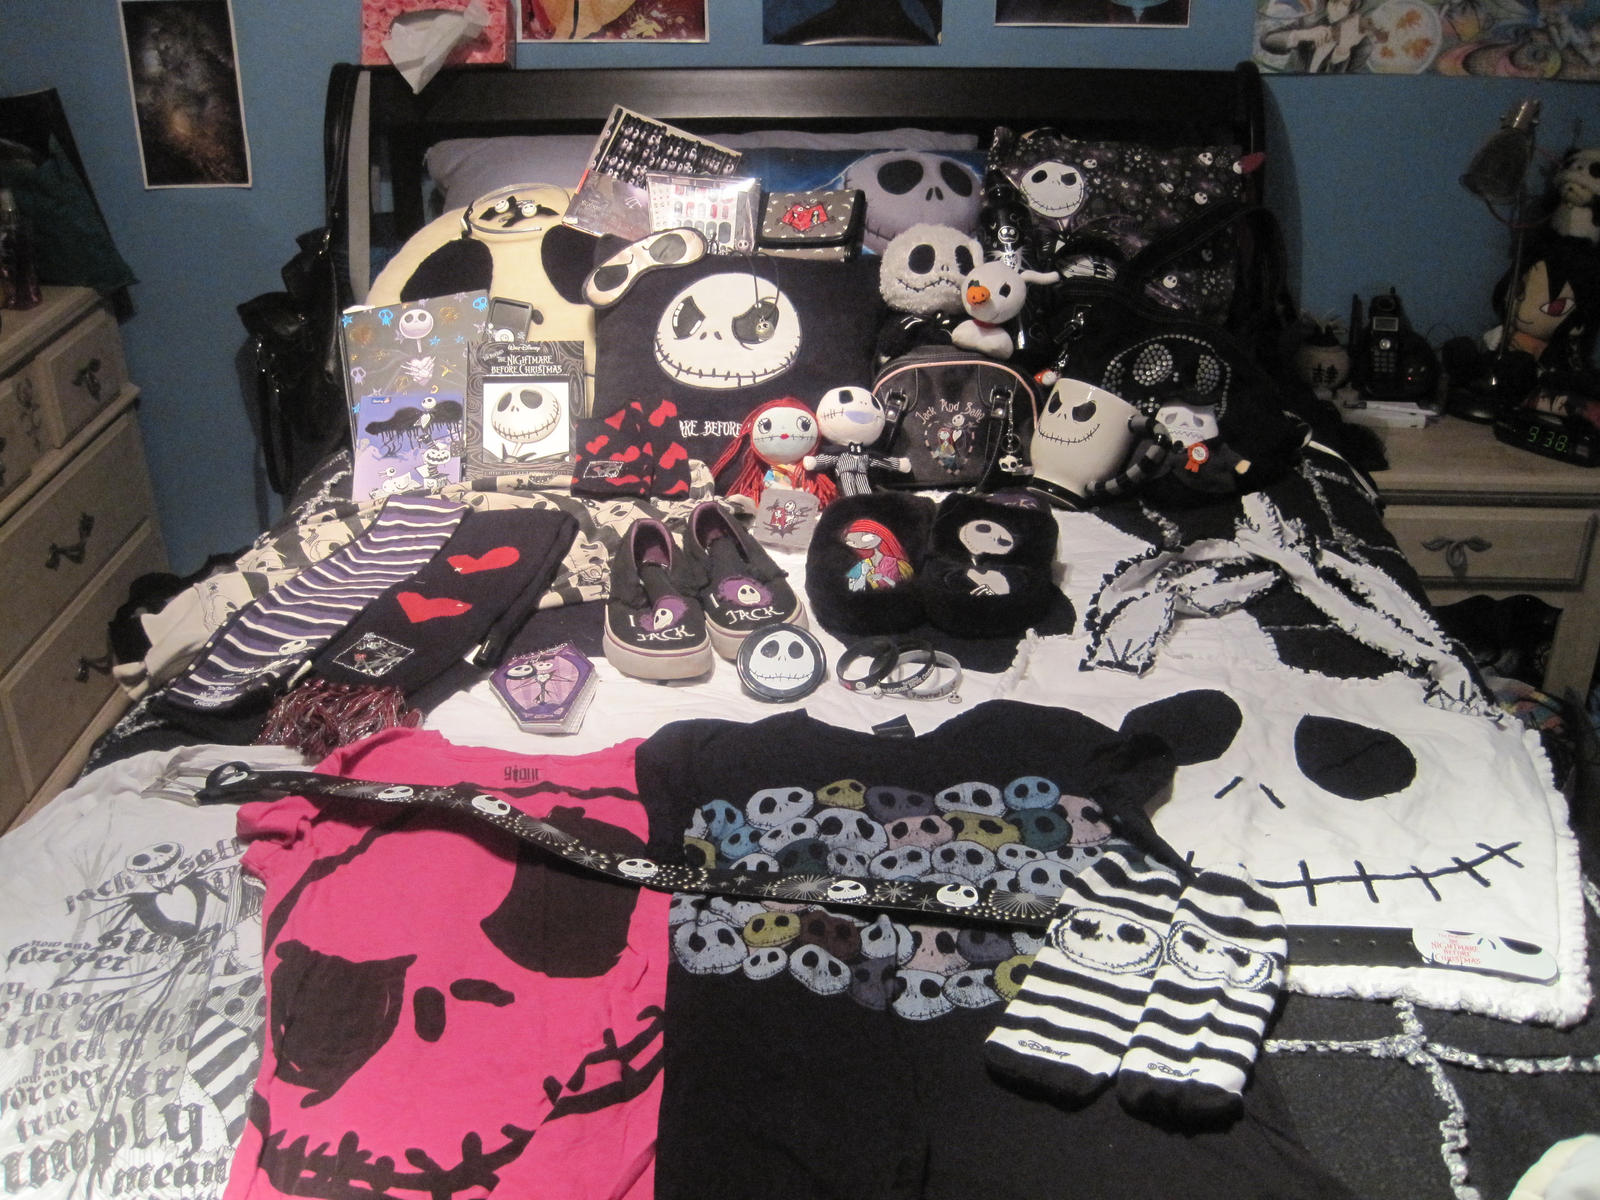 My Nightmare Before Christmas Collection by Ringo101 on DeviantArt